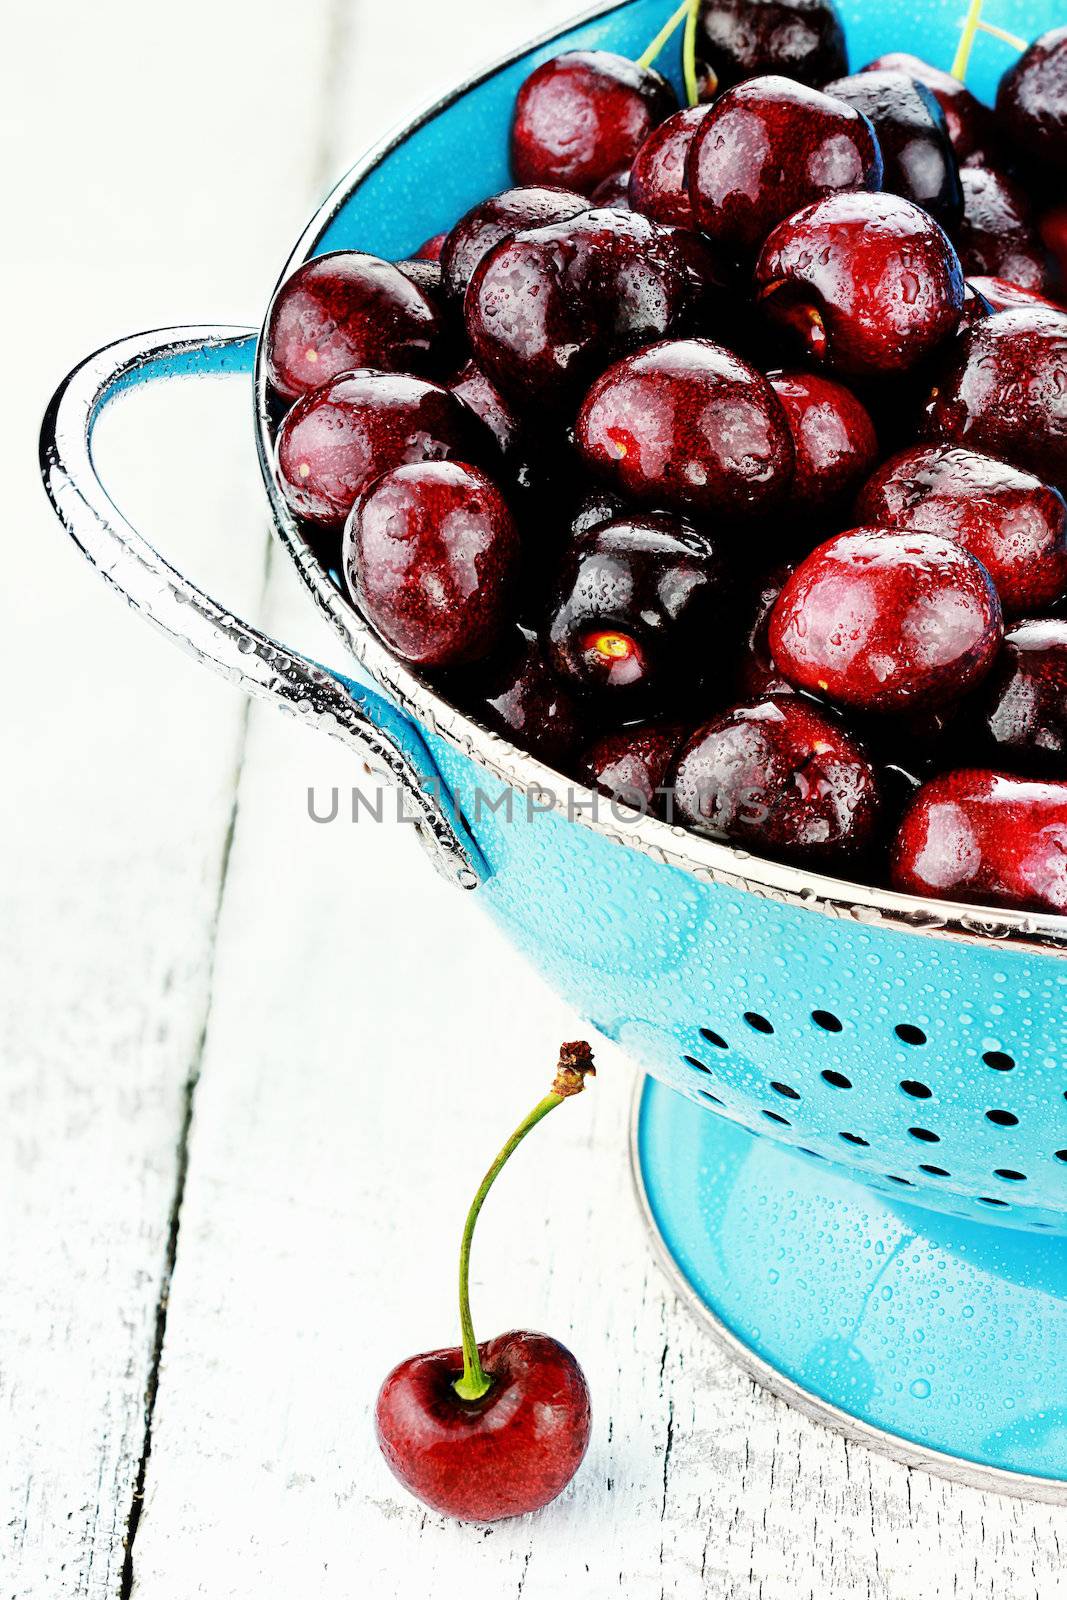 Blue colander filled with fresh black cherries over a rustic background.
